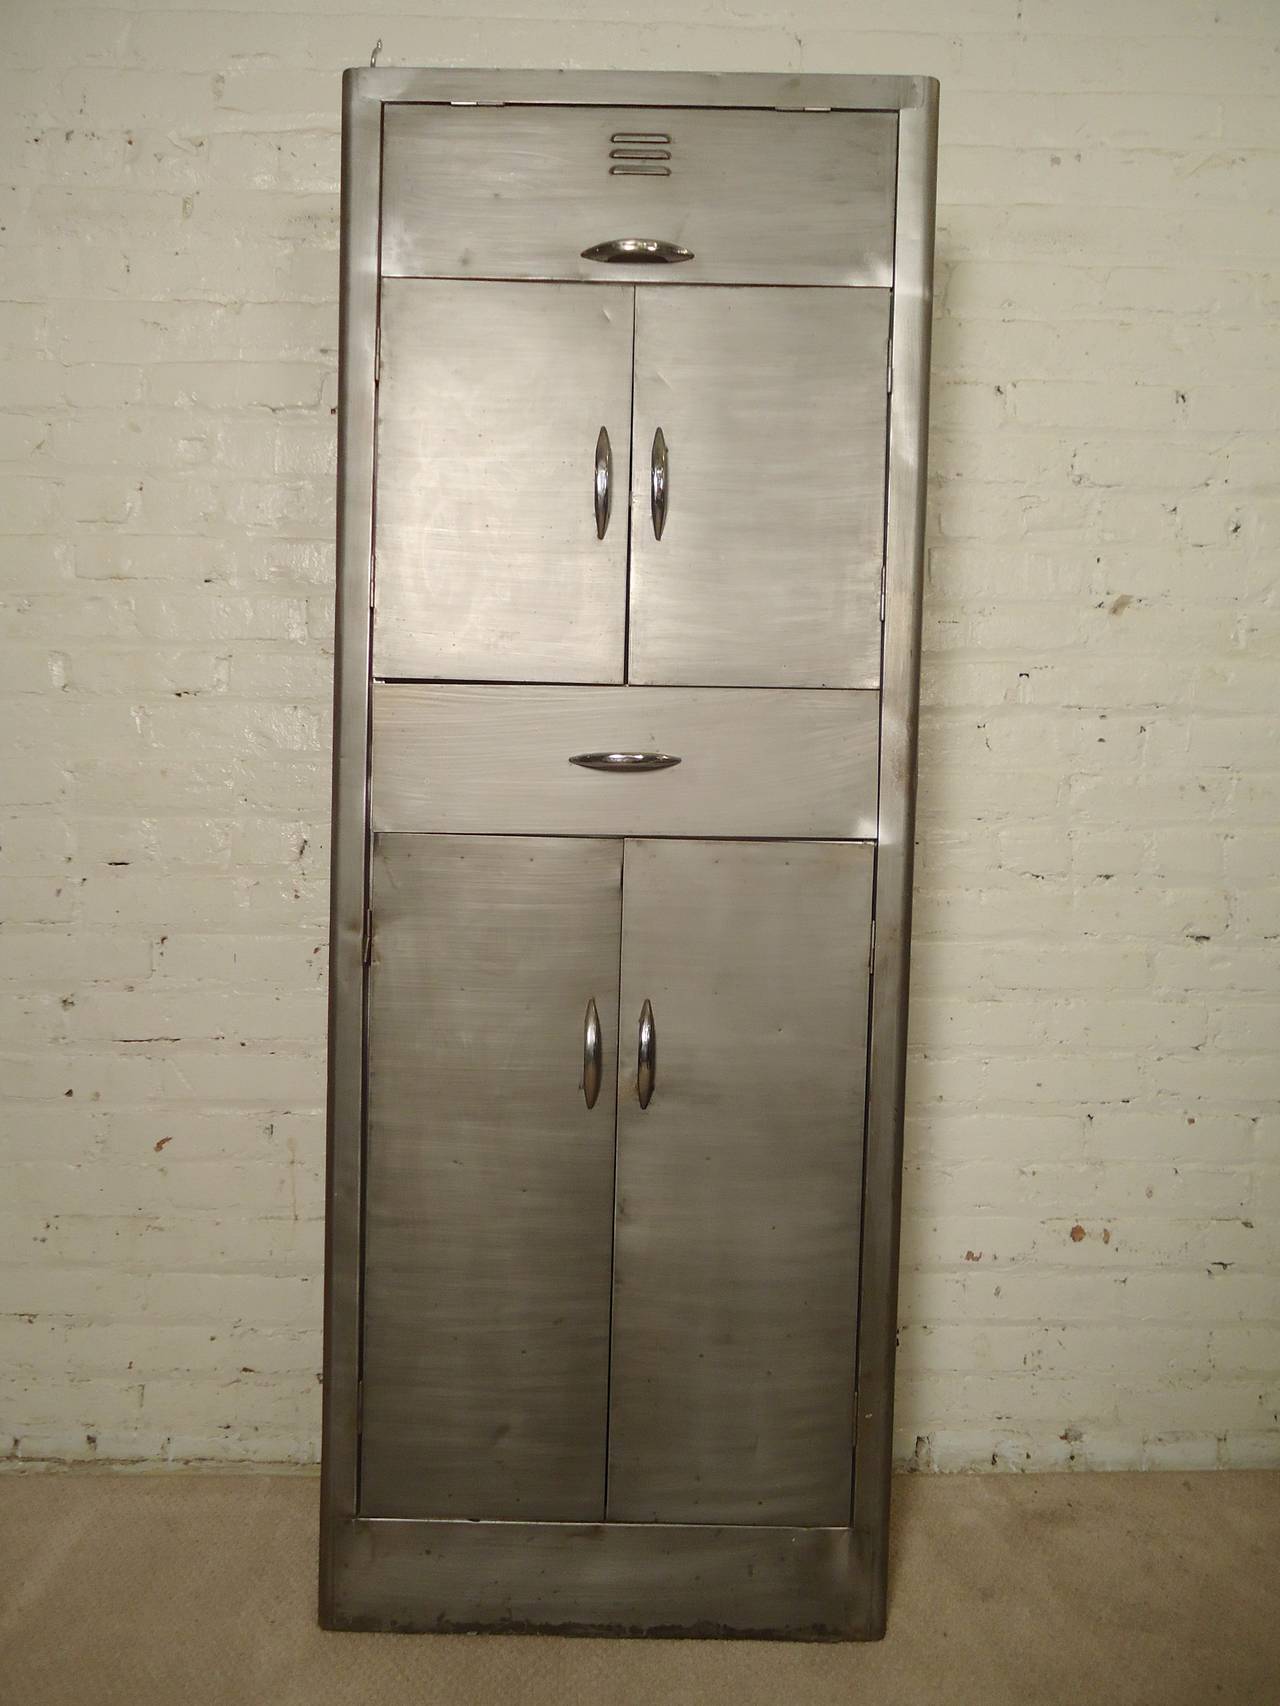 Vintage metal cabinet with varying storage. Shallow depth allows for storage in smaller kitchens or bathrooms.

(Please confirm item location - NY or NJ - with dealer)